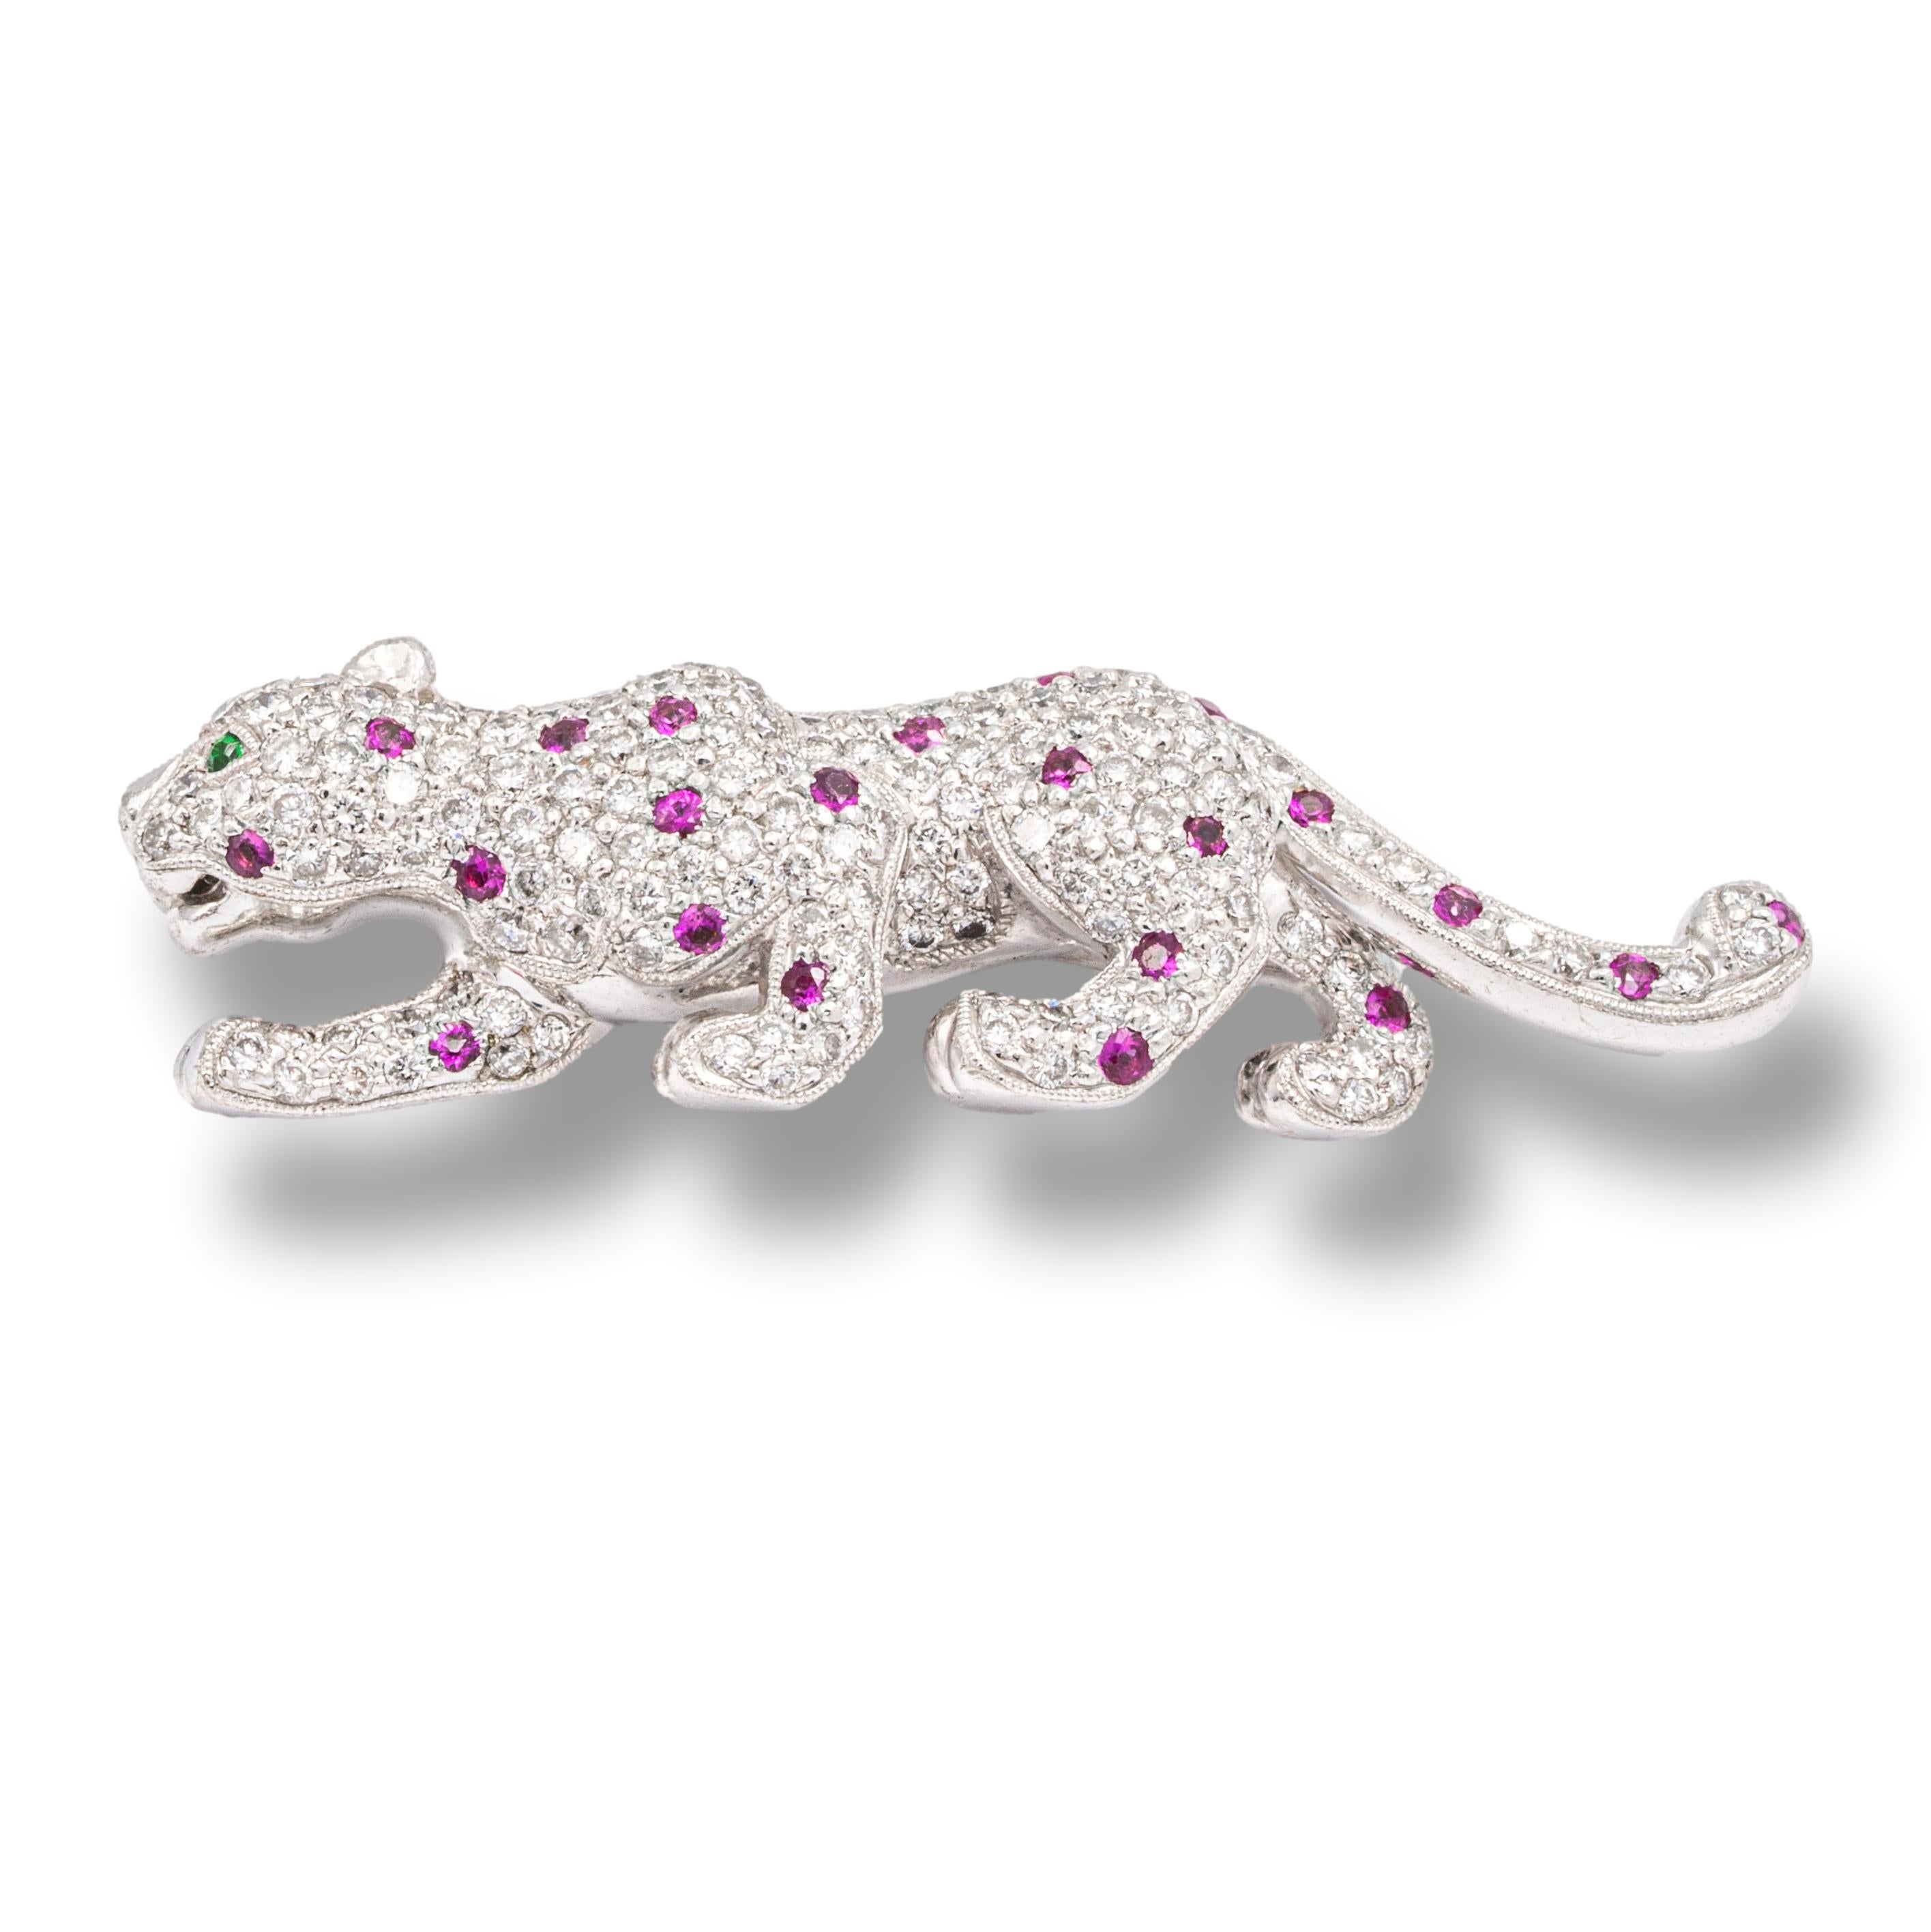 Vintage walking panther brooch finely crafted in 18 karat white gold with 123 round brilliant cut pave set diamonds weighing approximately 2.50 carats total weight, F-G Color VS-VVS Clarity and 22 pink sapphires weighing 0.44 carats total weight.